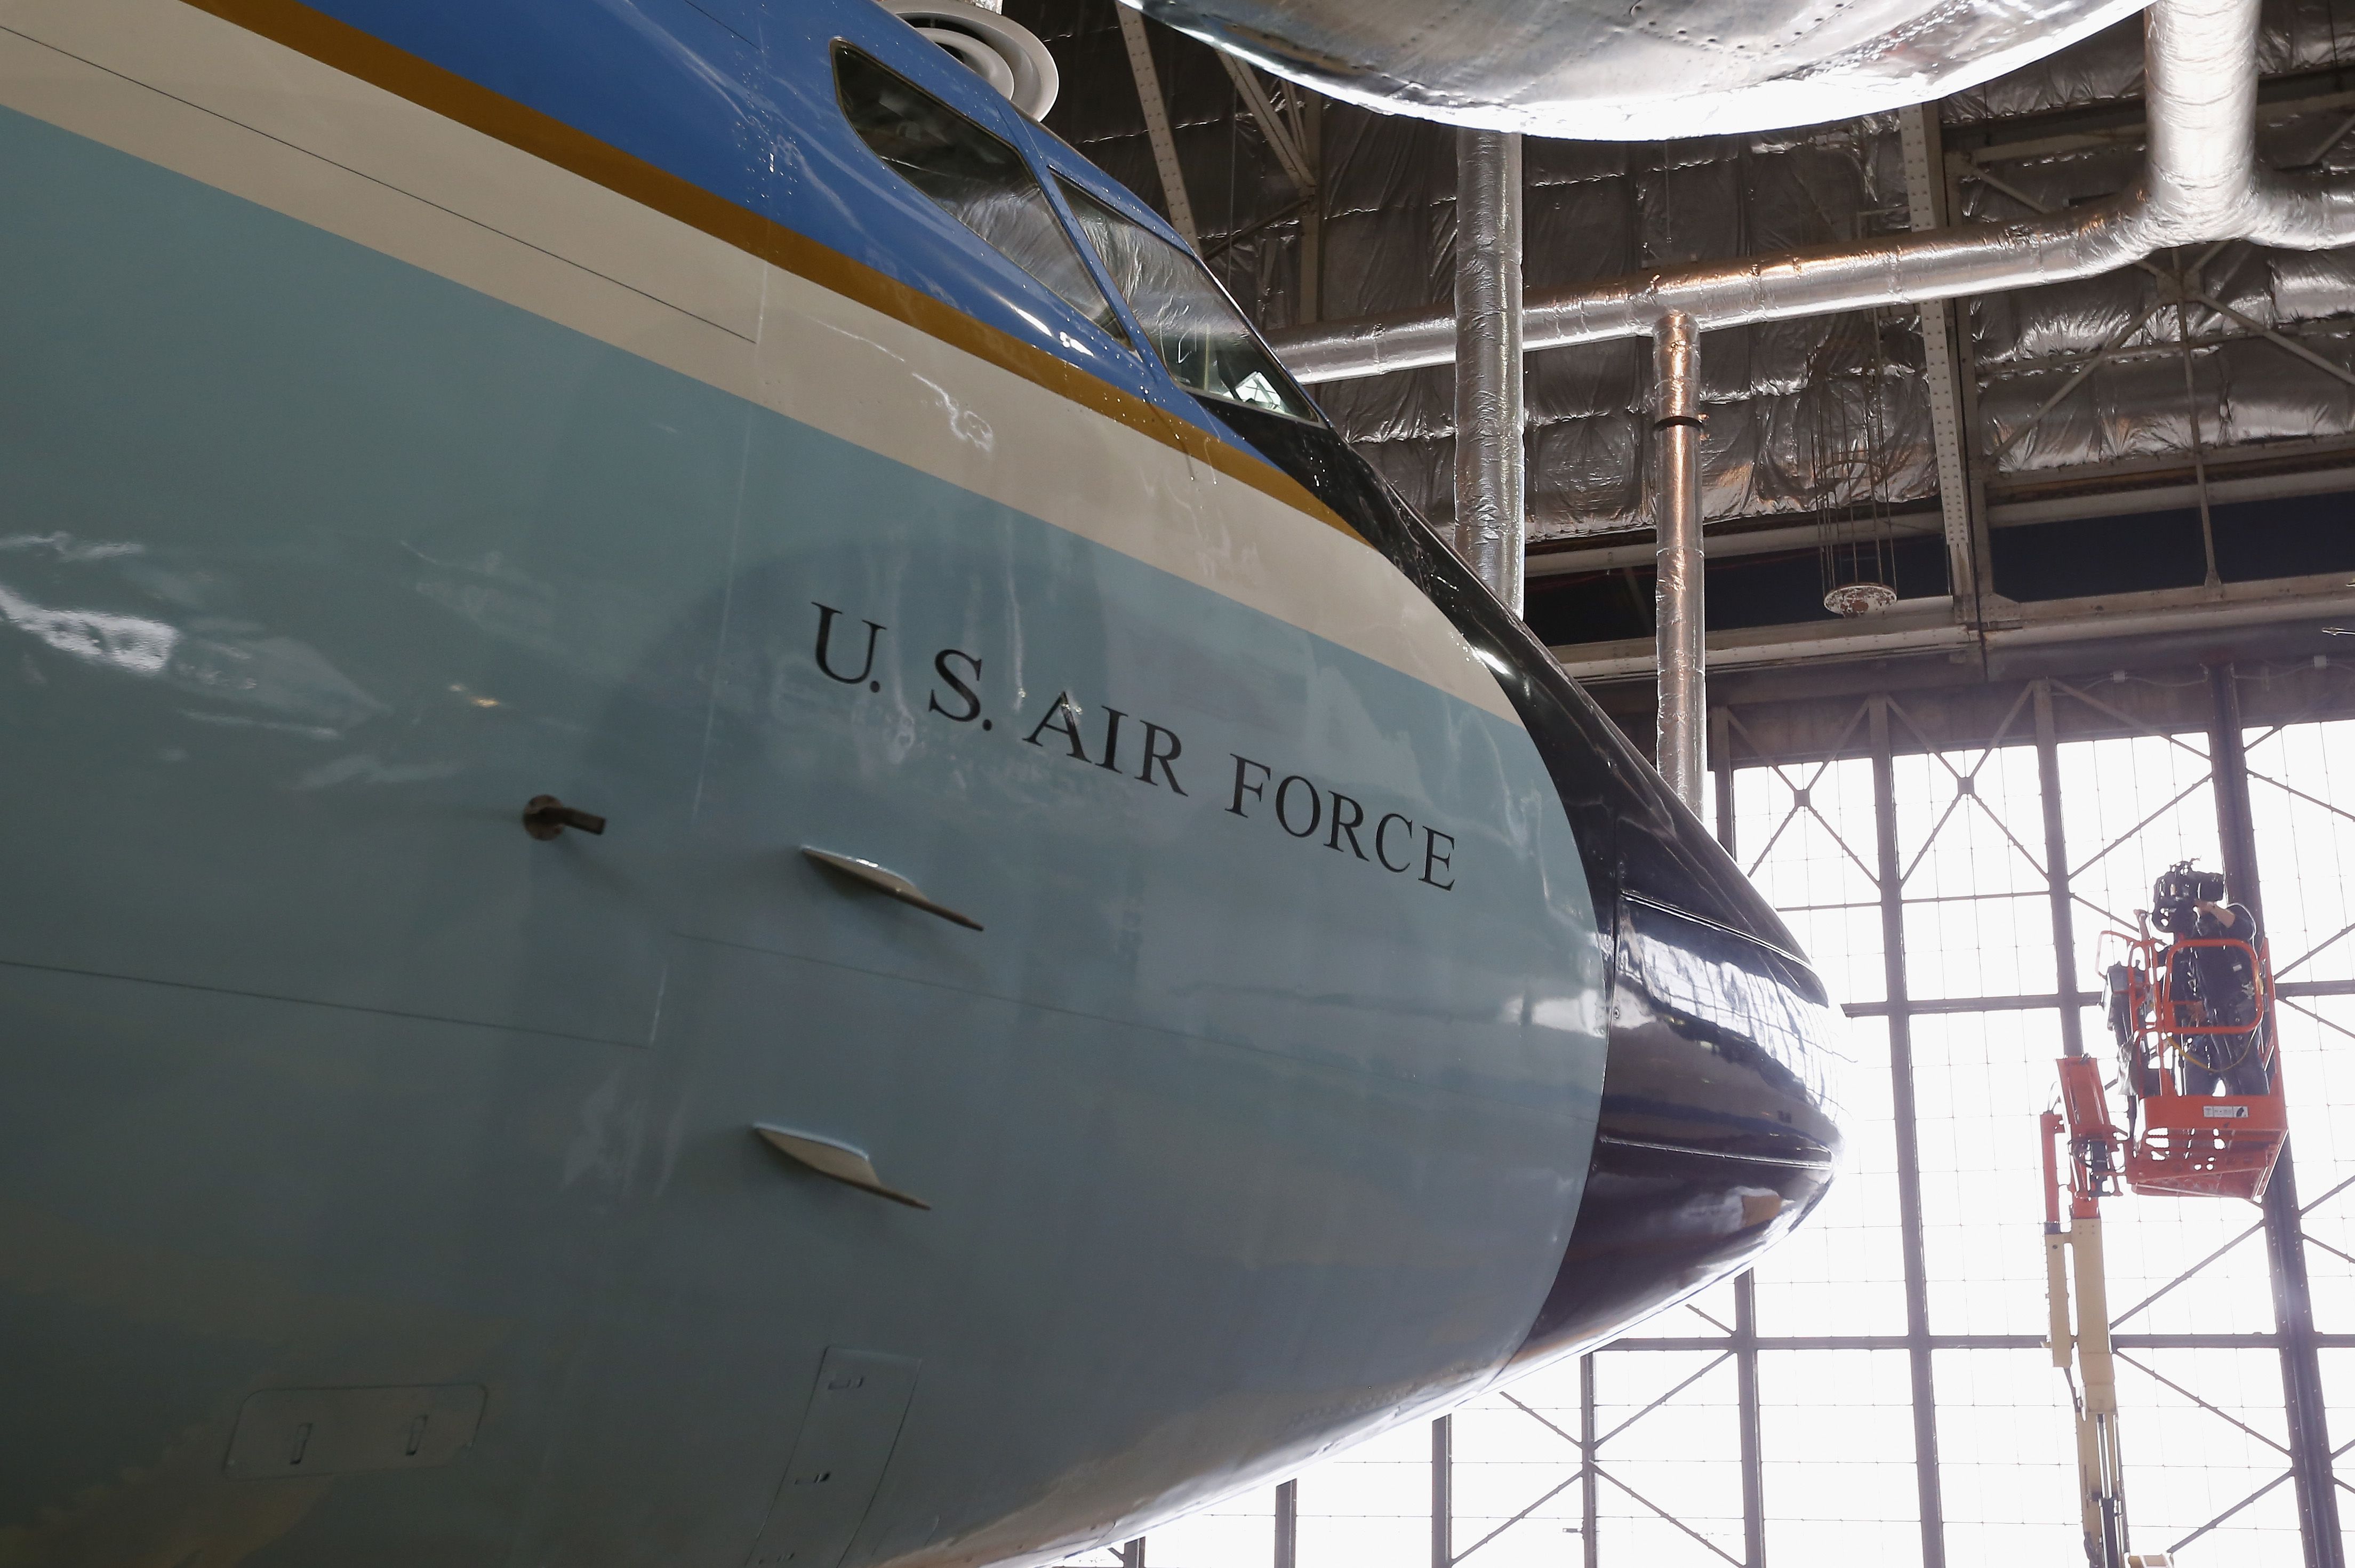 A Visual History of Air Force One